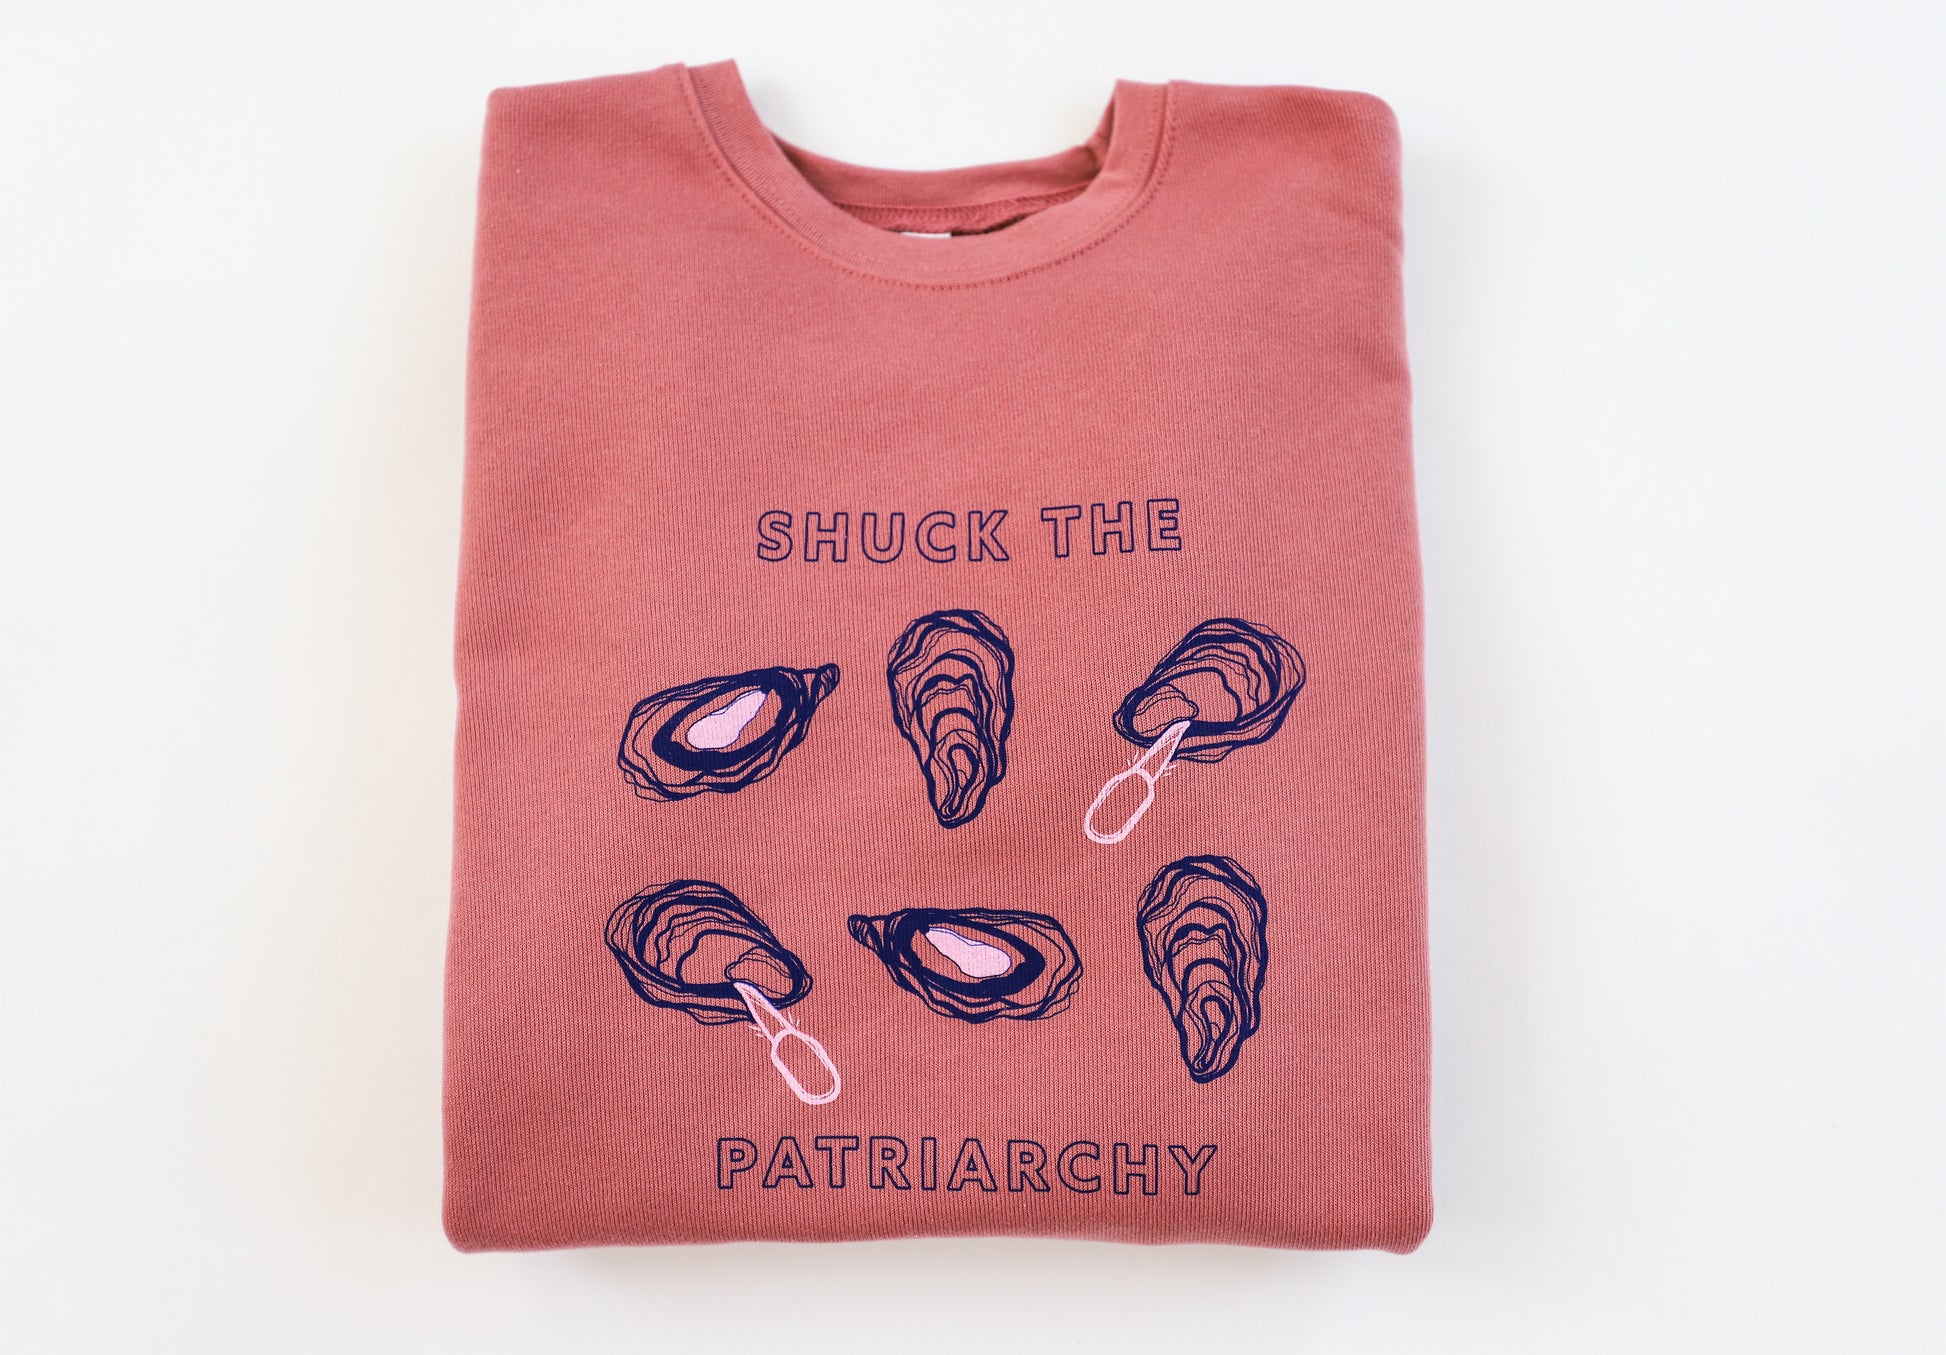 A folded pink crewneck reads "Shuck the Patriarchy" in blue block letters with oyster designs